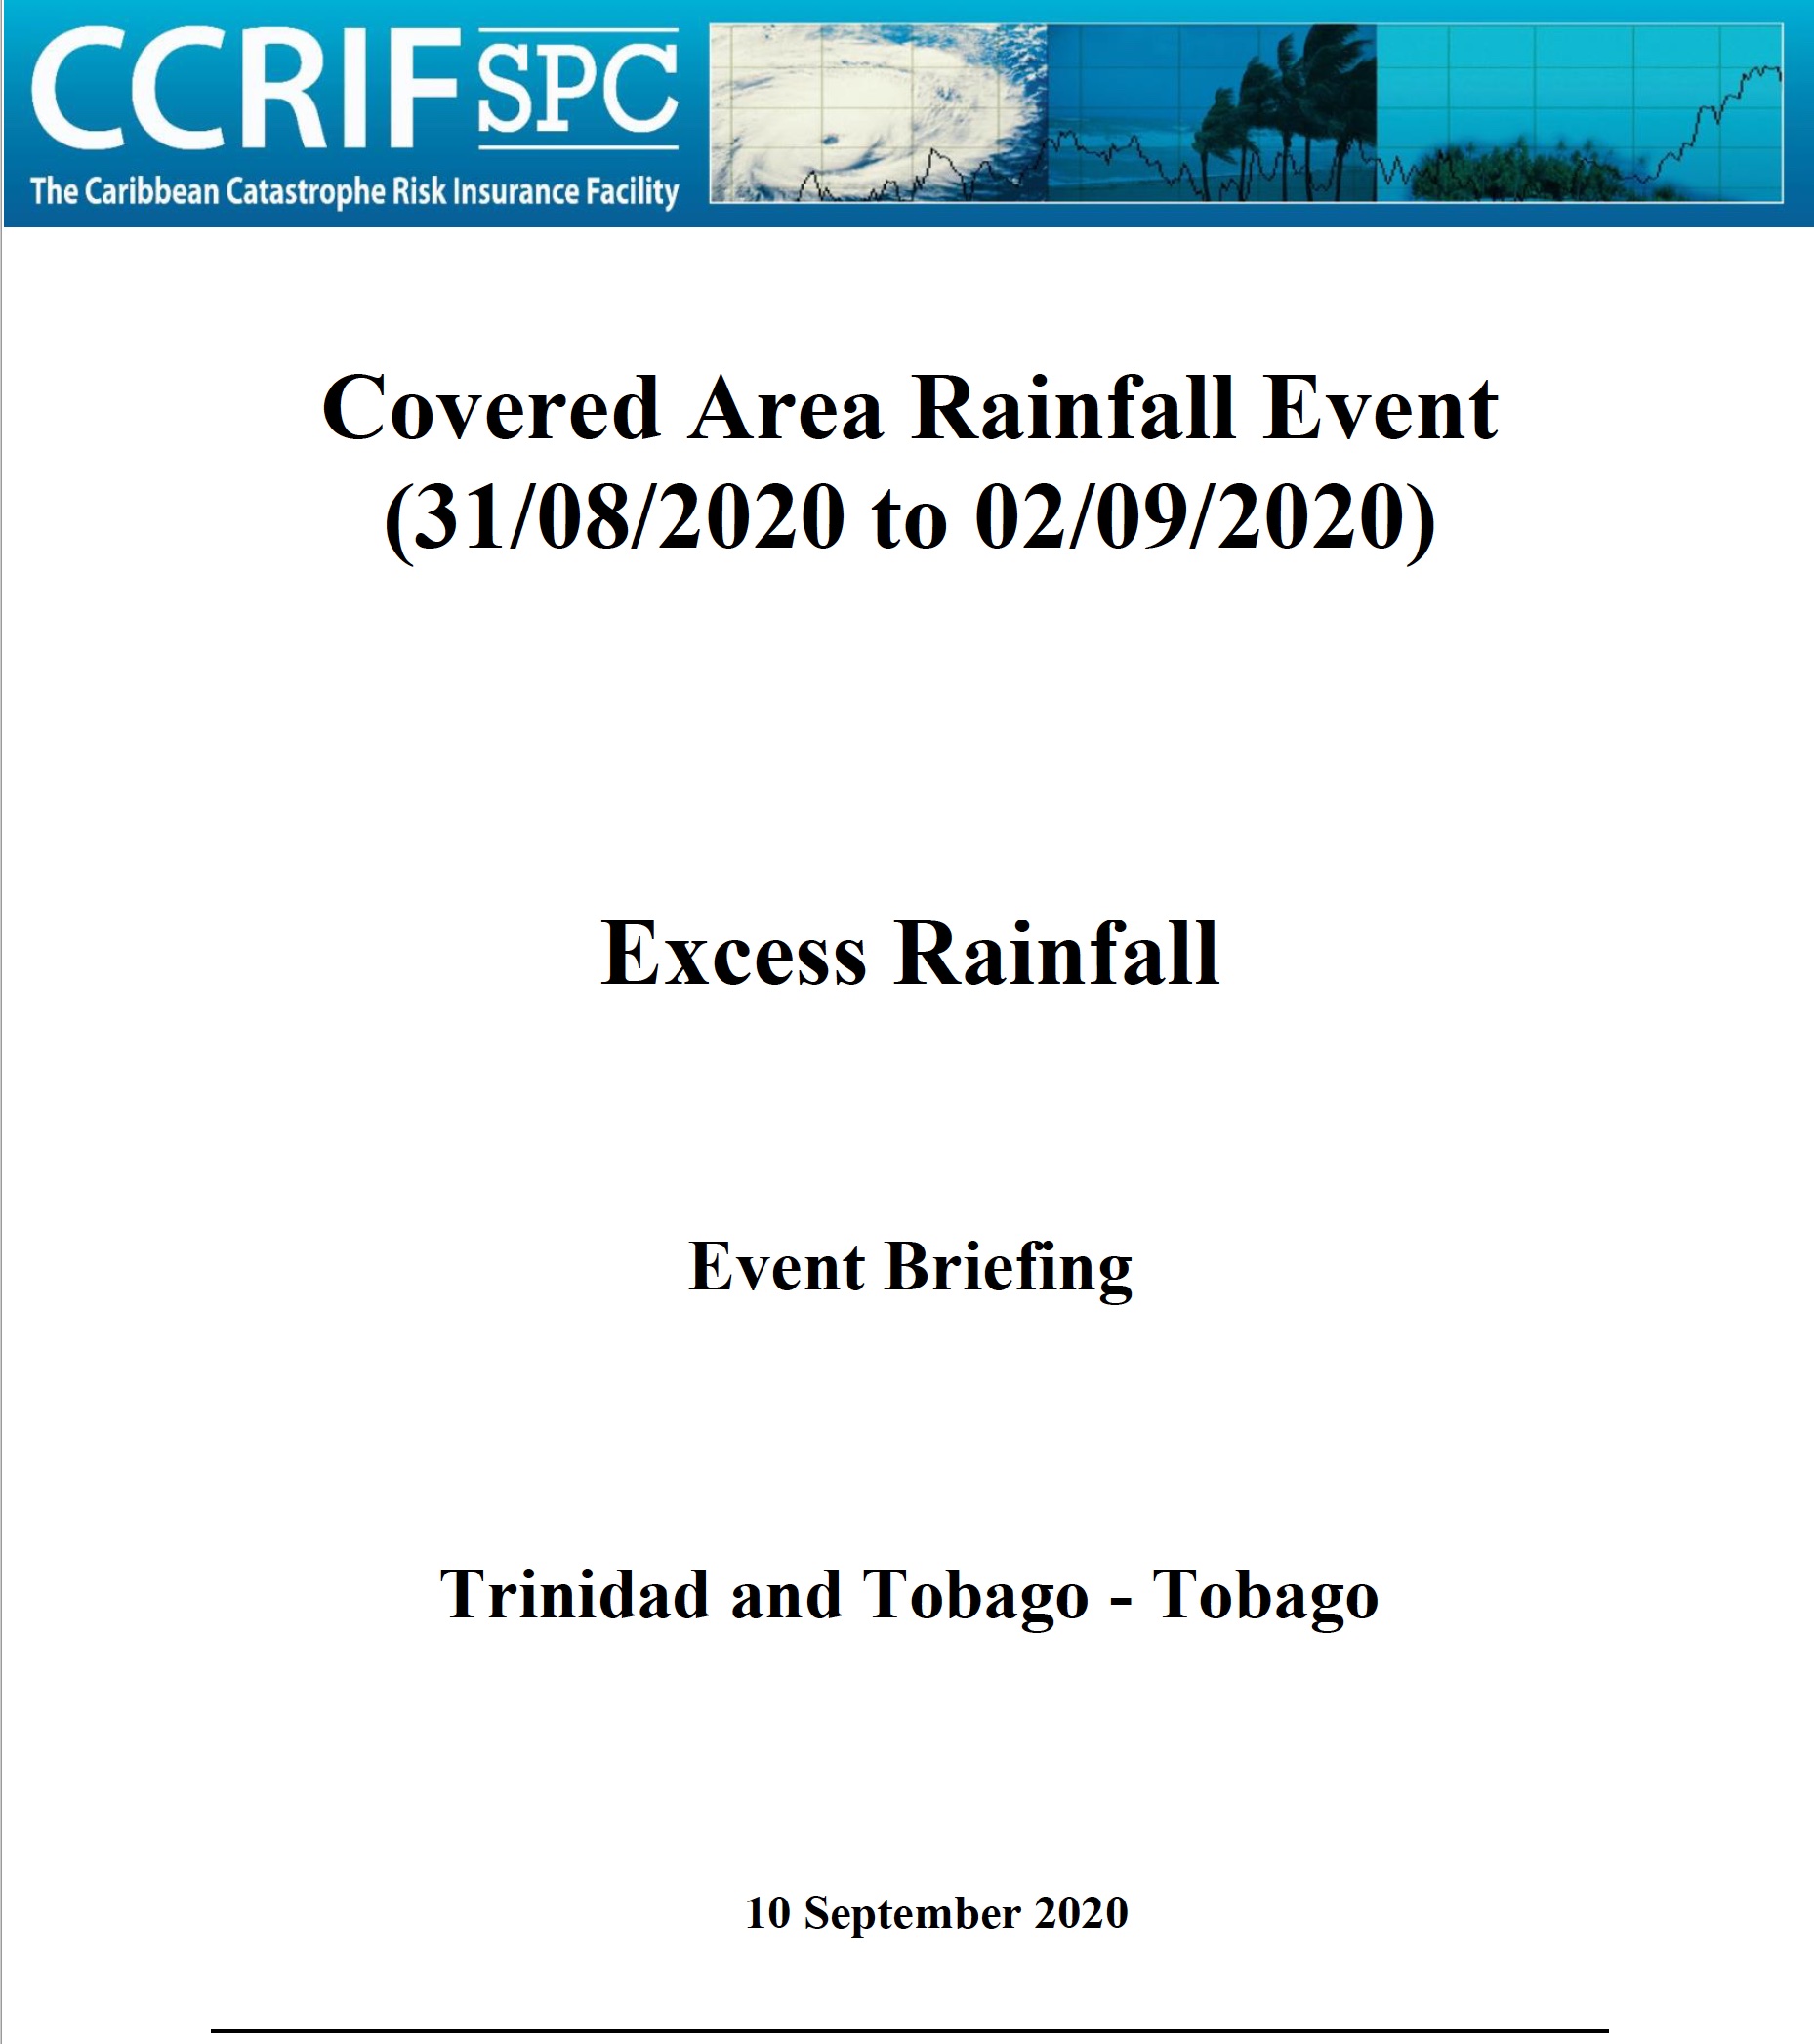 Event Briefing - Excess Rainfall - Covered Area Rainfall Event - Grenada - September 10 2020